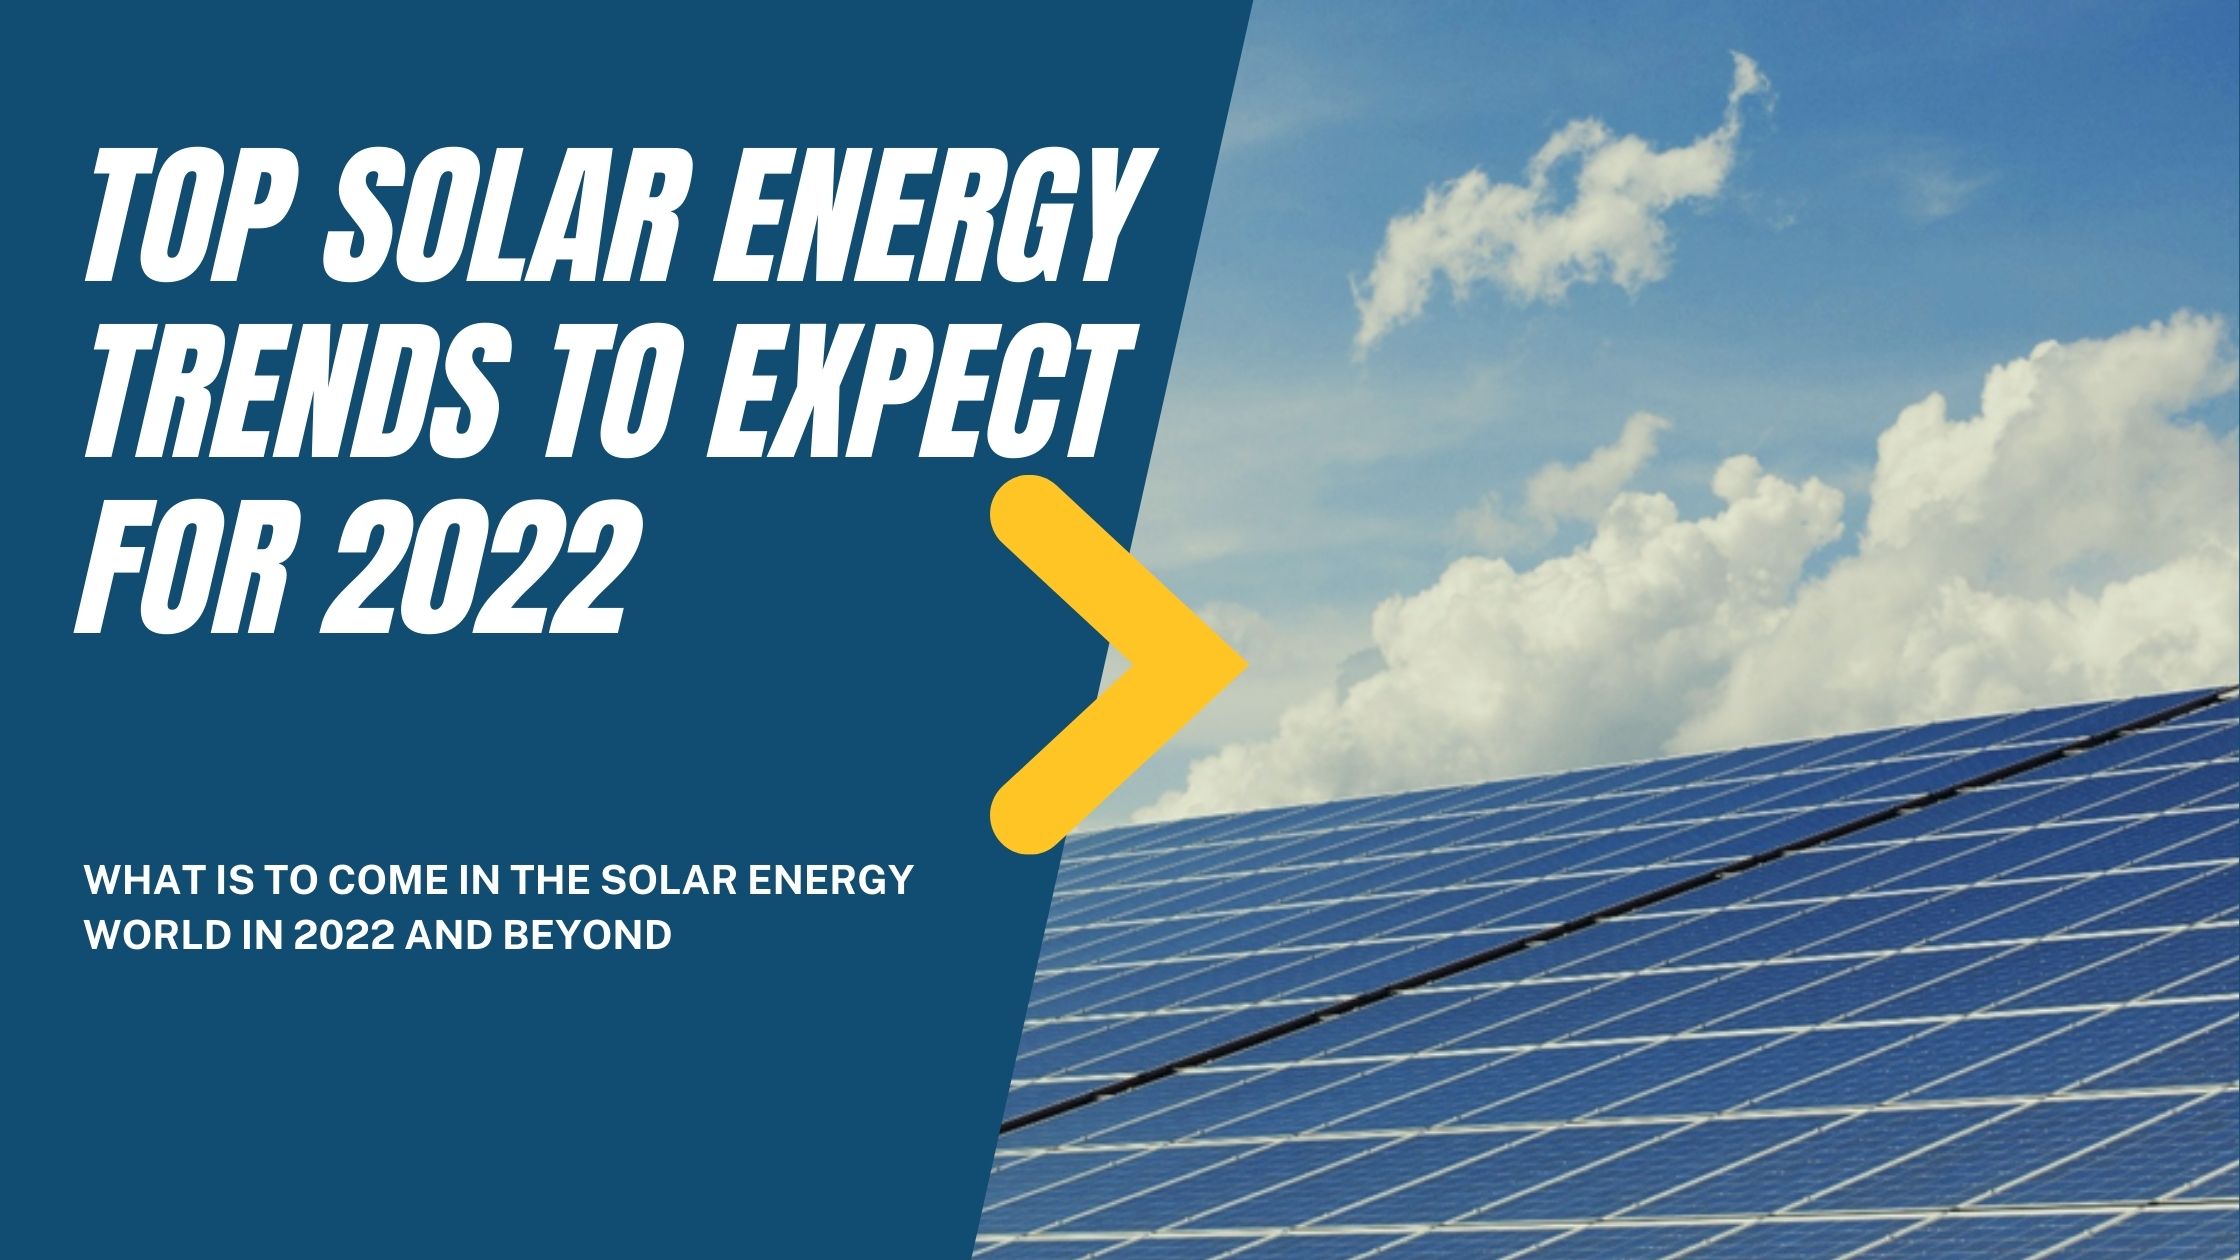 Top Solar Energy Trends to Expect for 2022